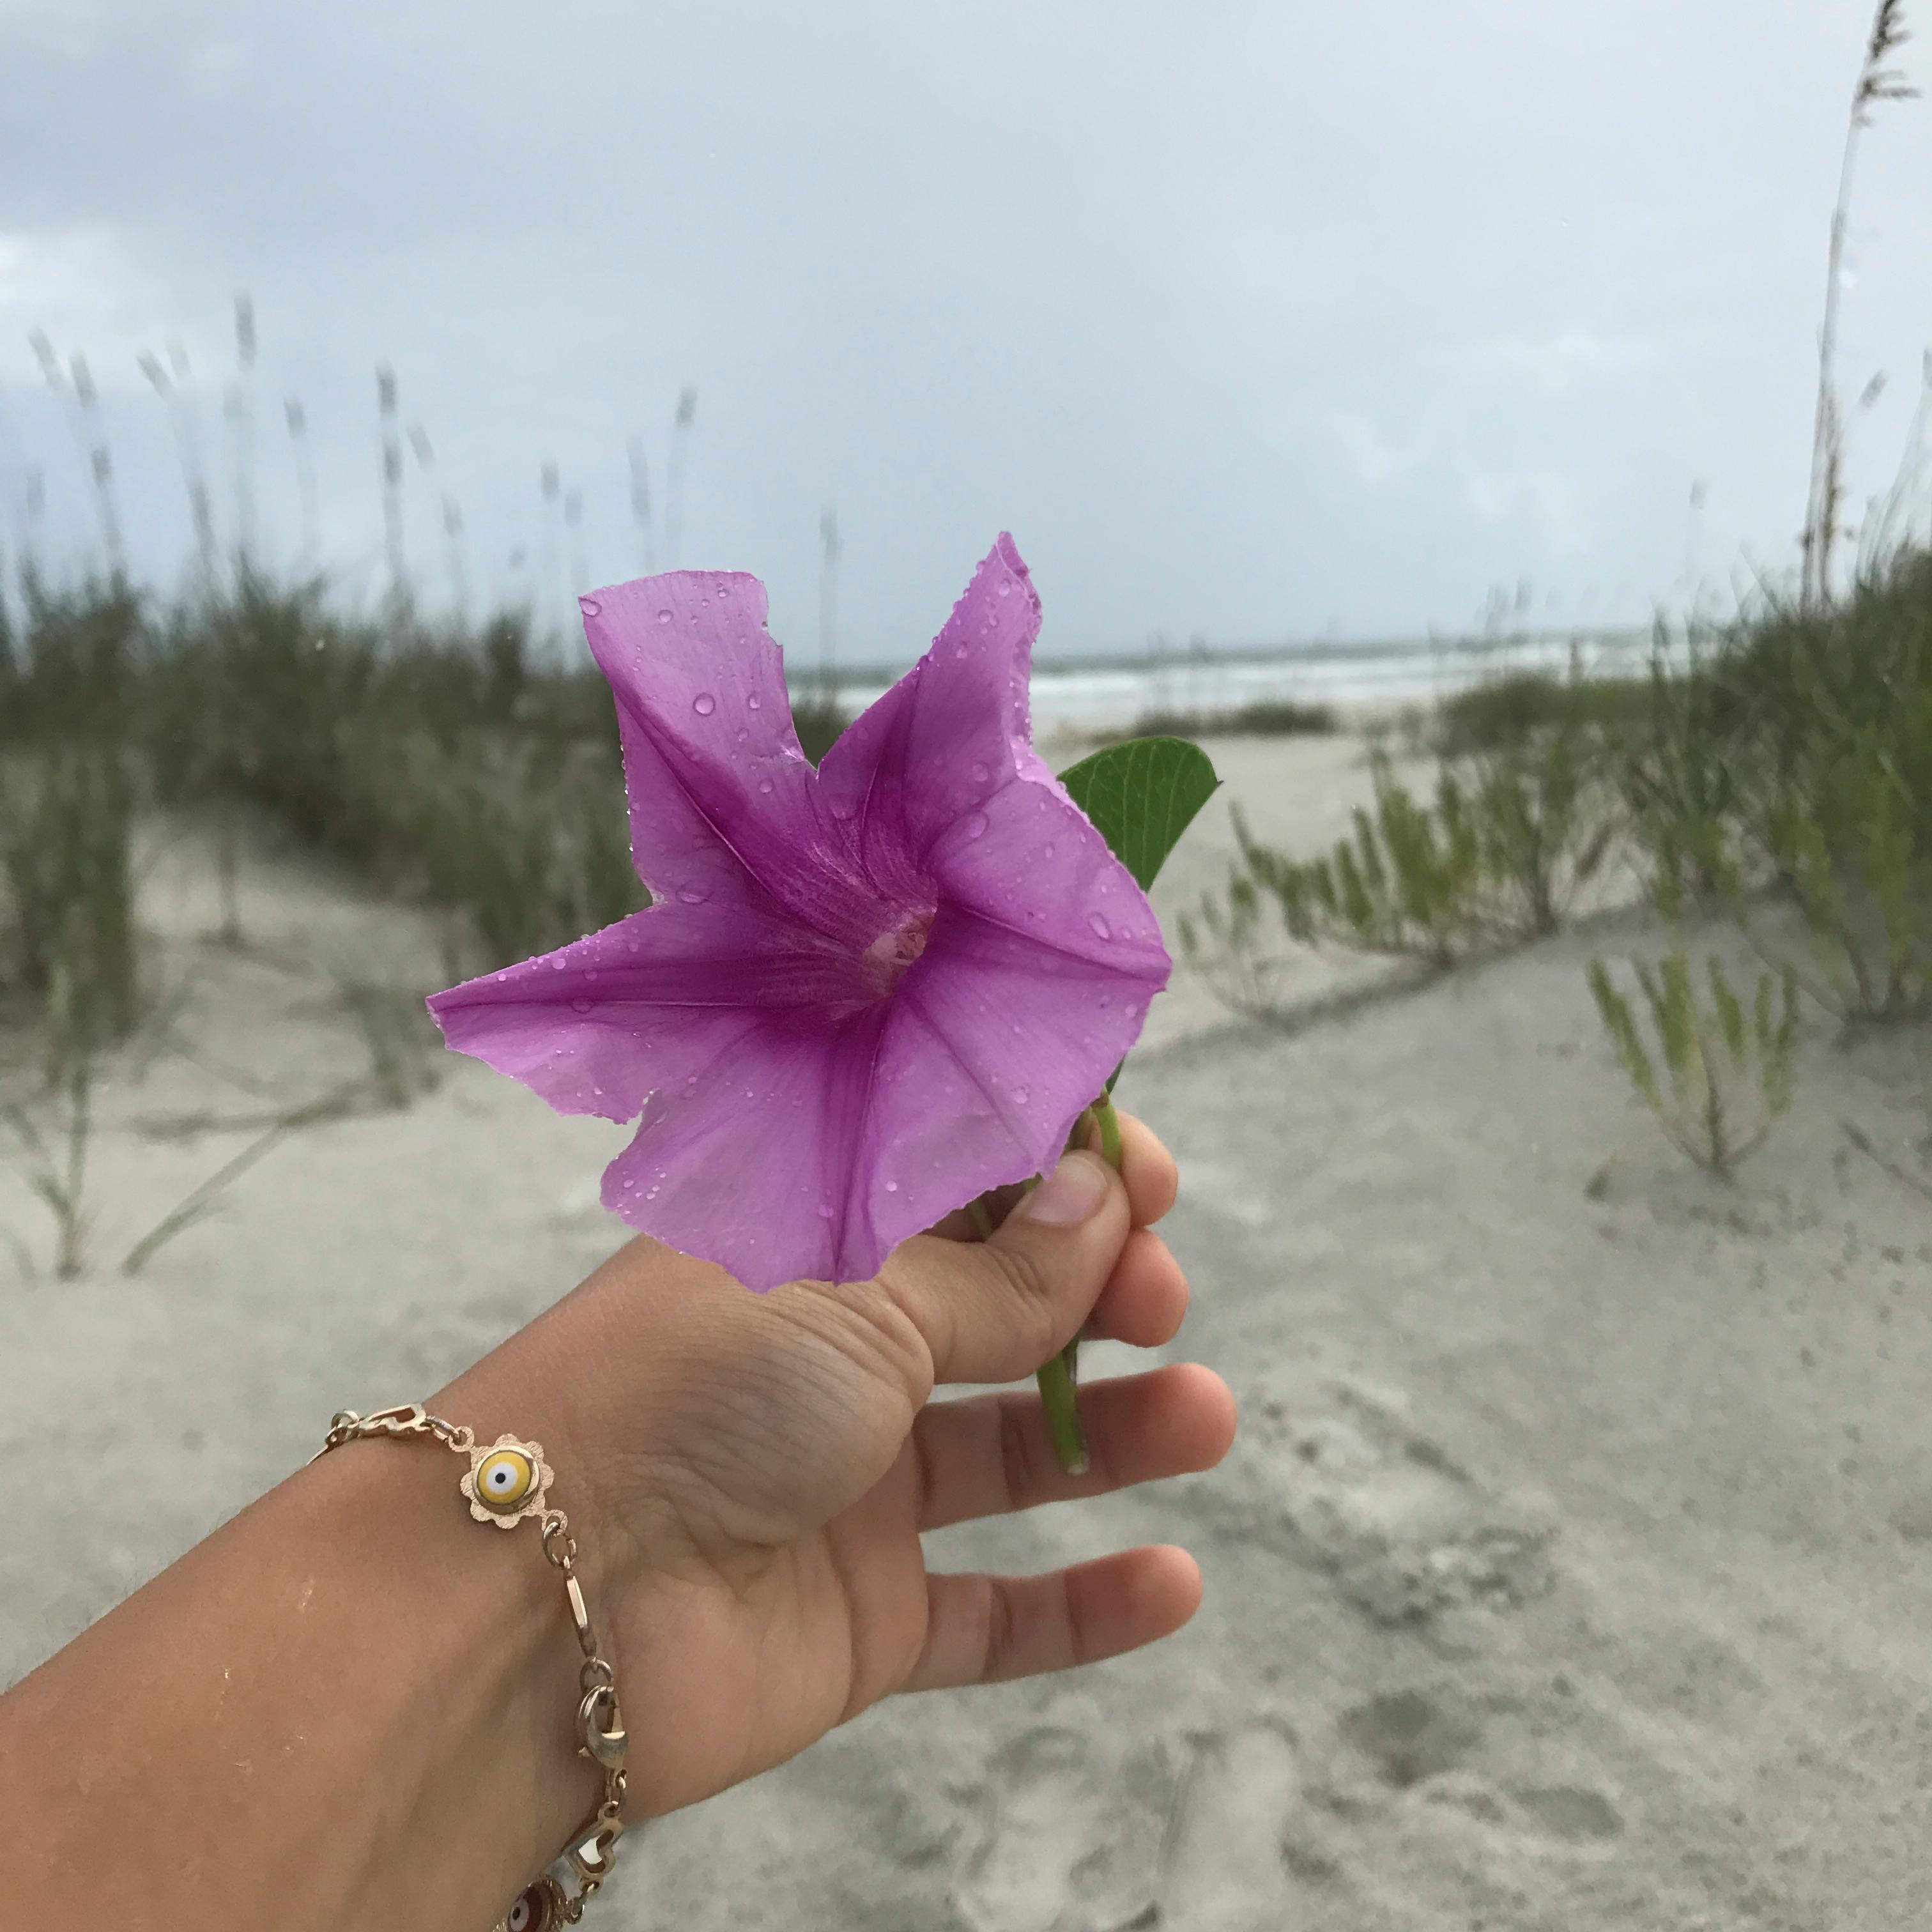 Free stock photo of gold bracelet, pretty purple flower in hand over beach